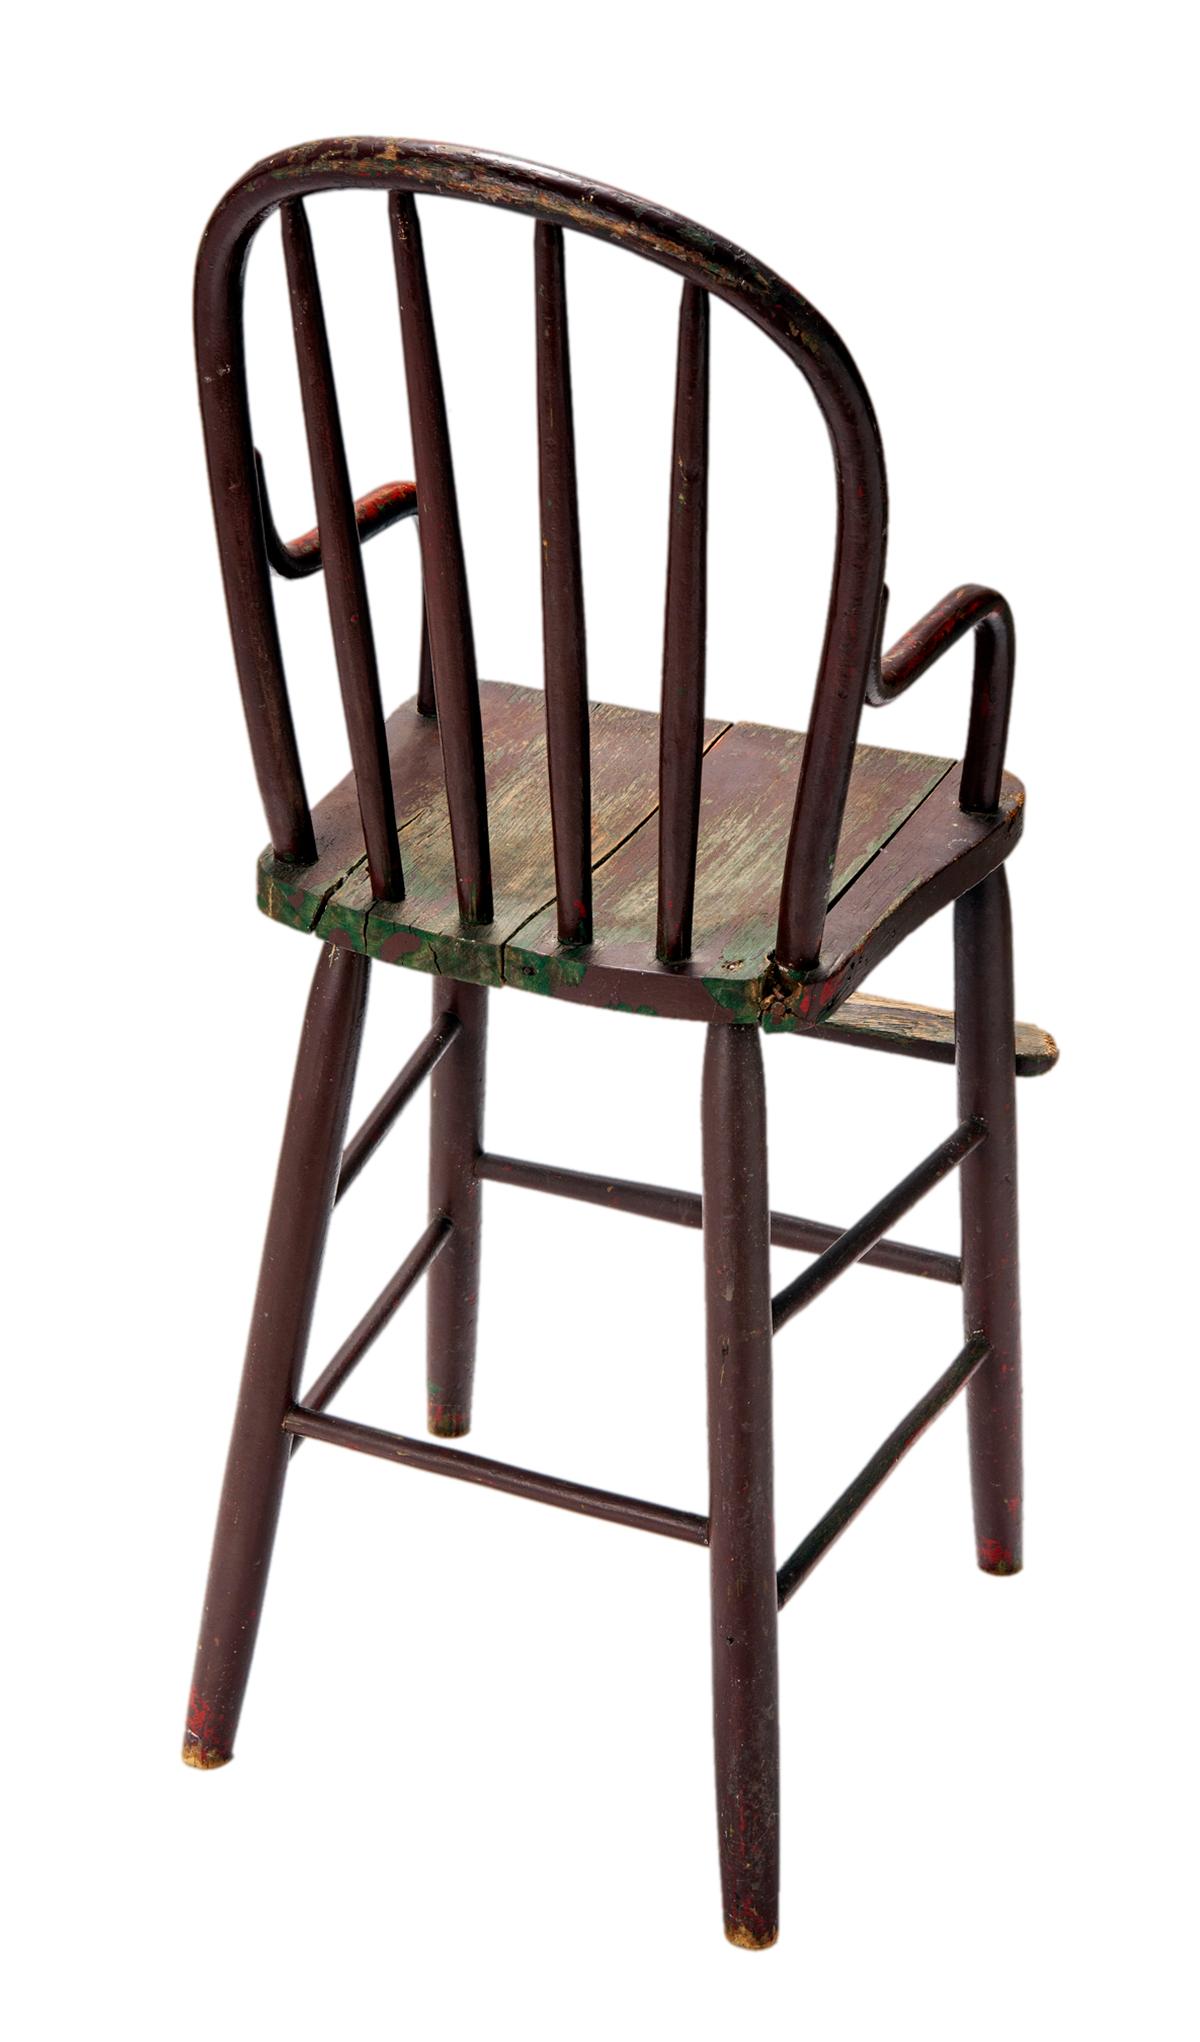 Painted Primitive Antique Bentwood Child's High Chair